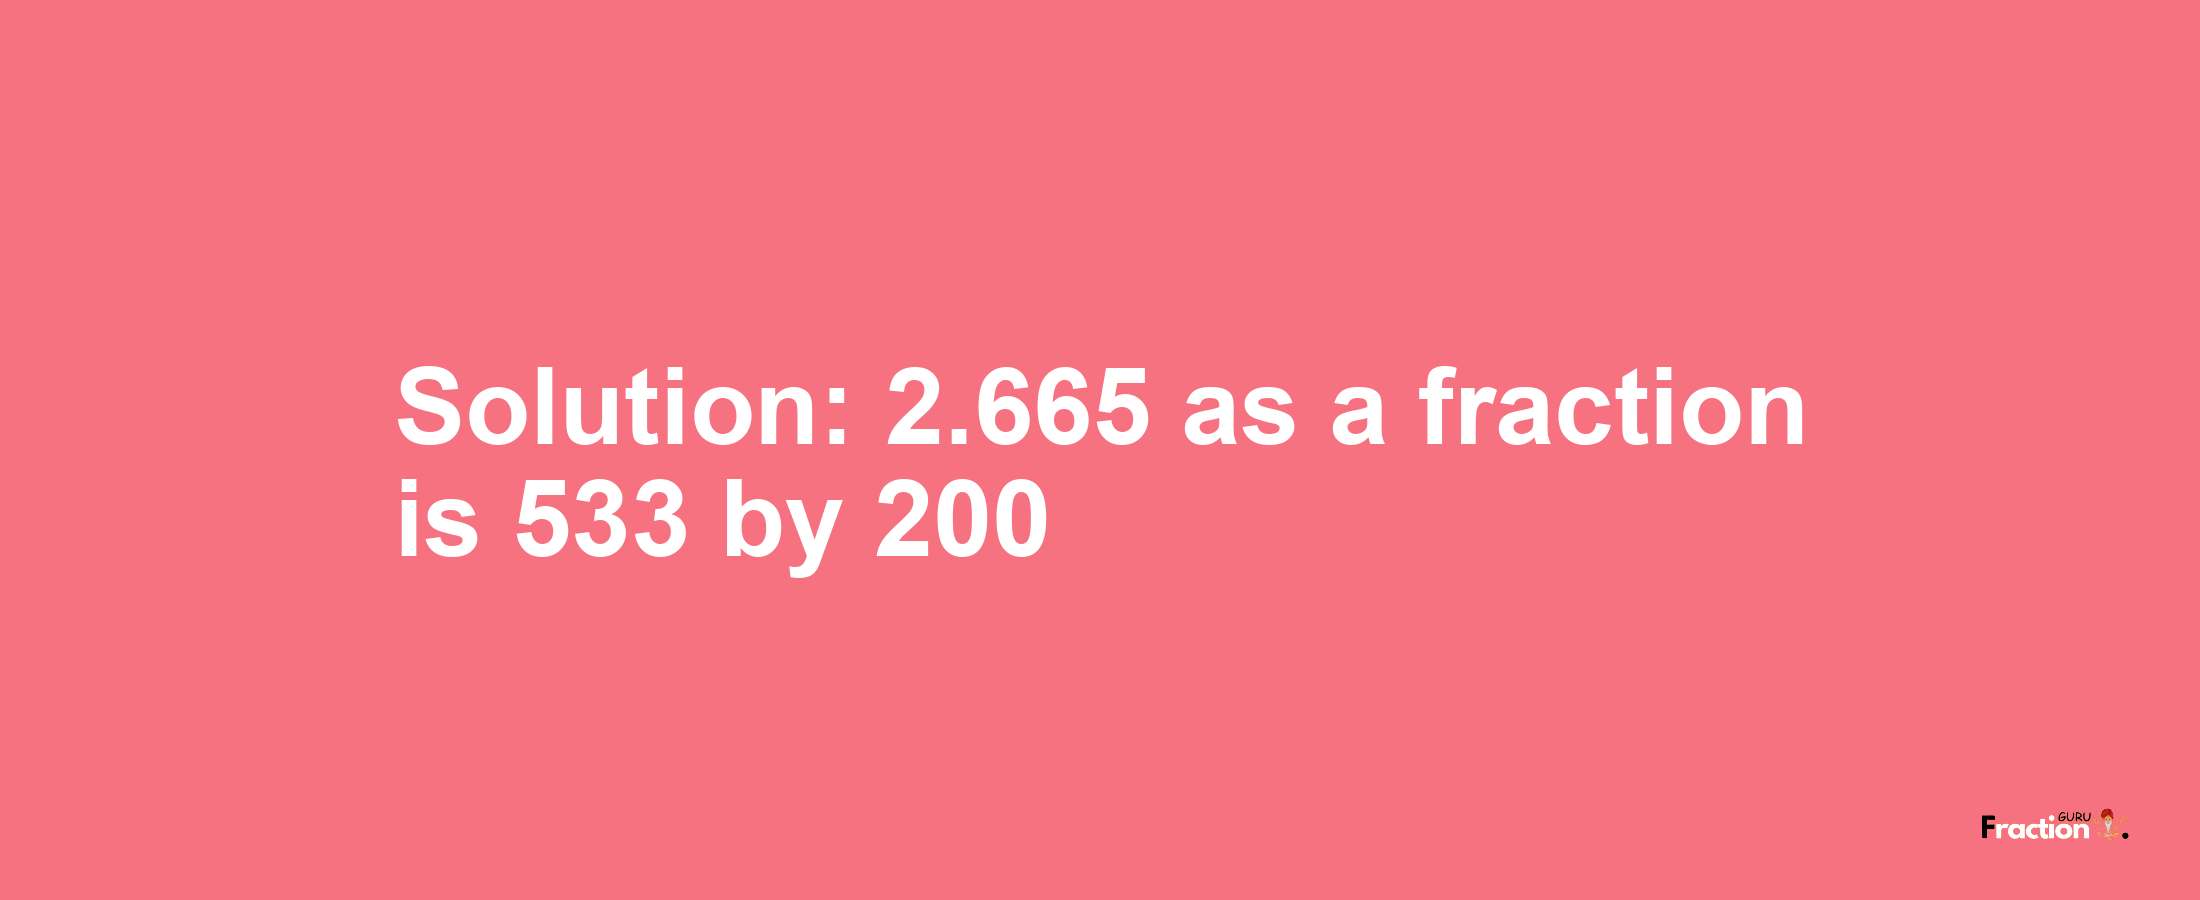 Solution:2.665 as a fraction is 533/200